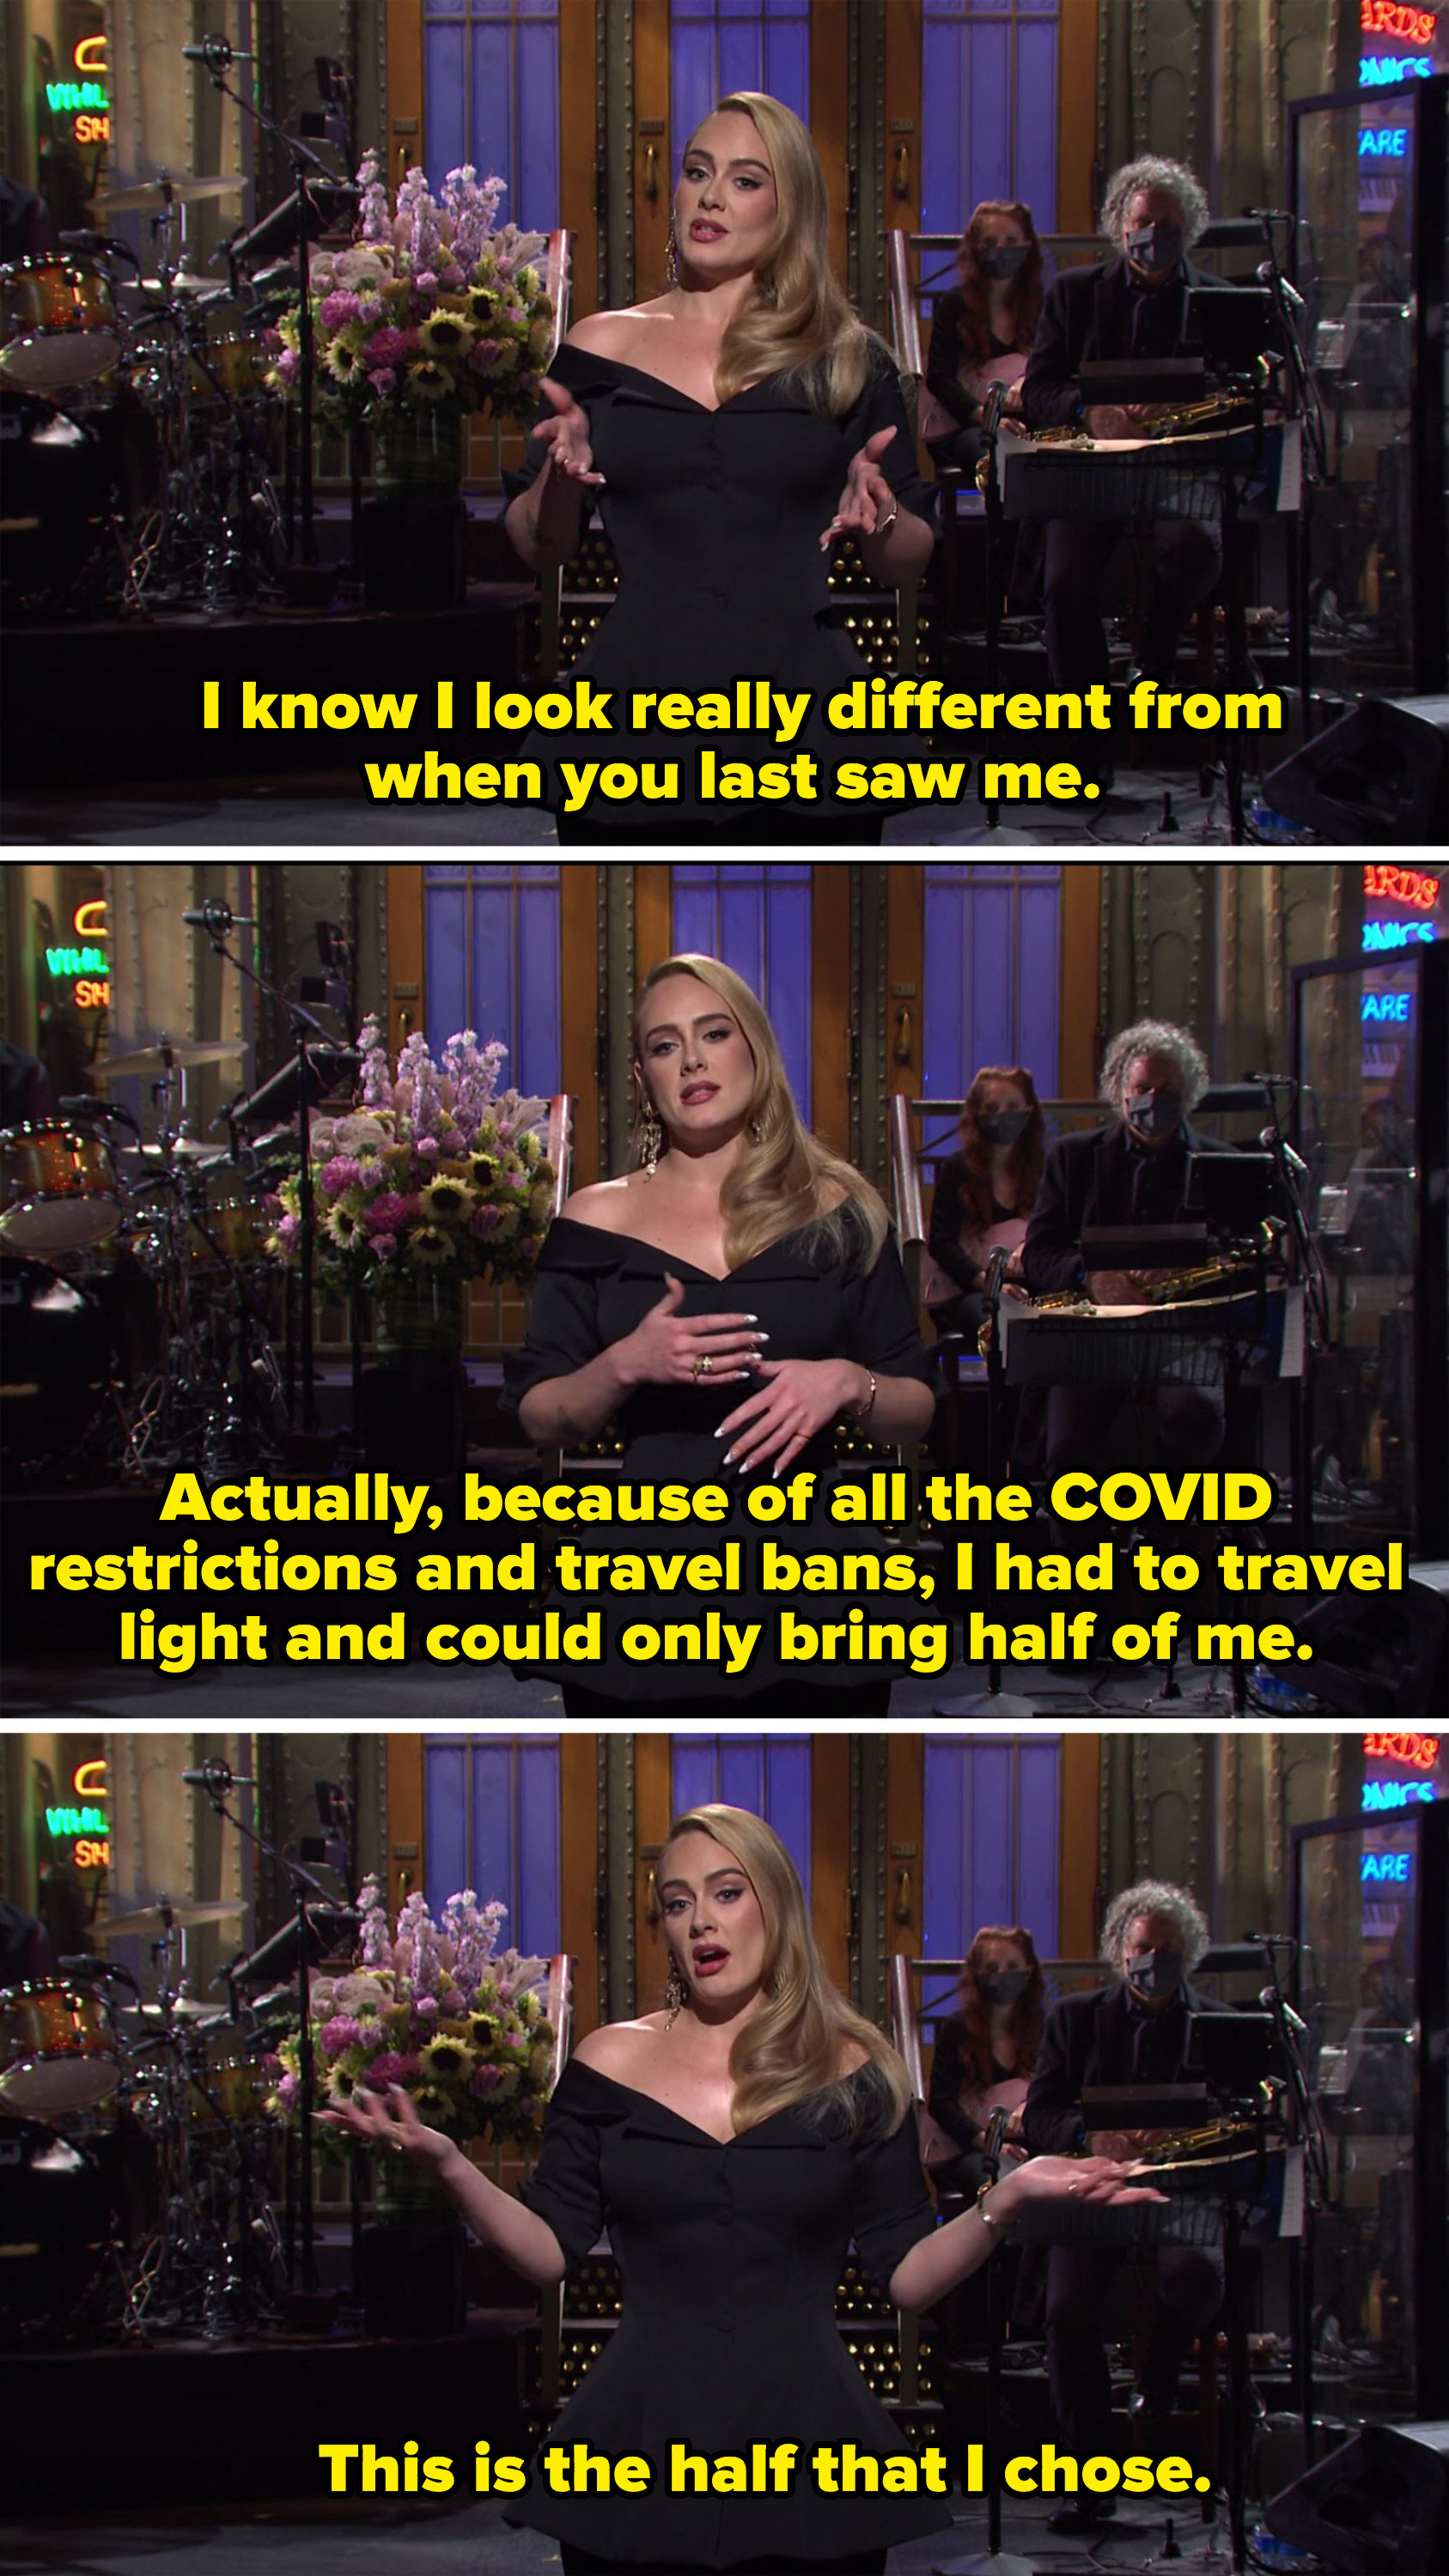 Adele saying she could only bring half of her because of covid restrictions